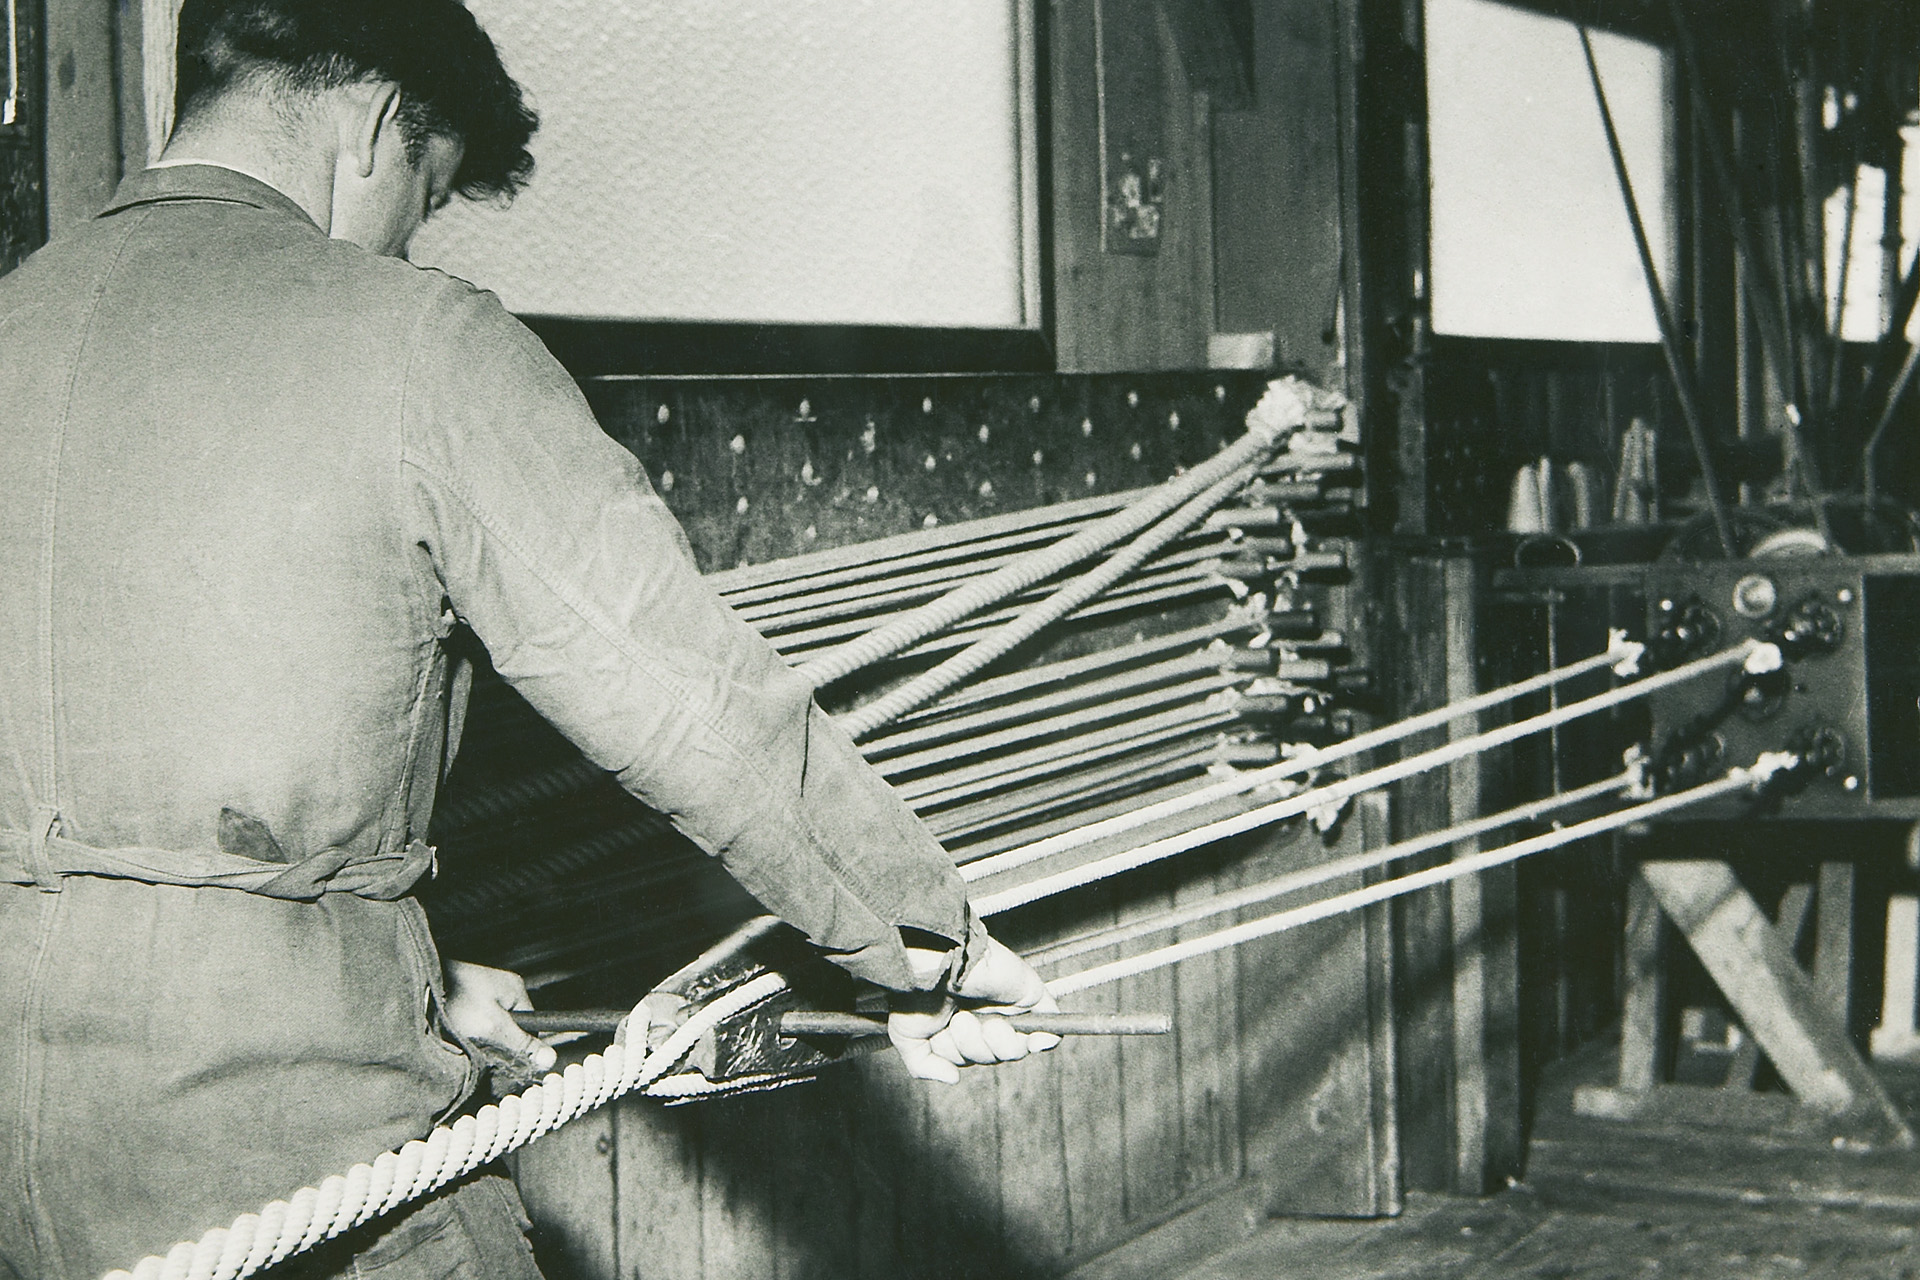 An old photography of a worker producing a fibre rope in the 1950s